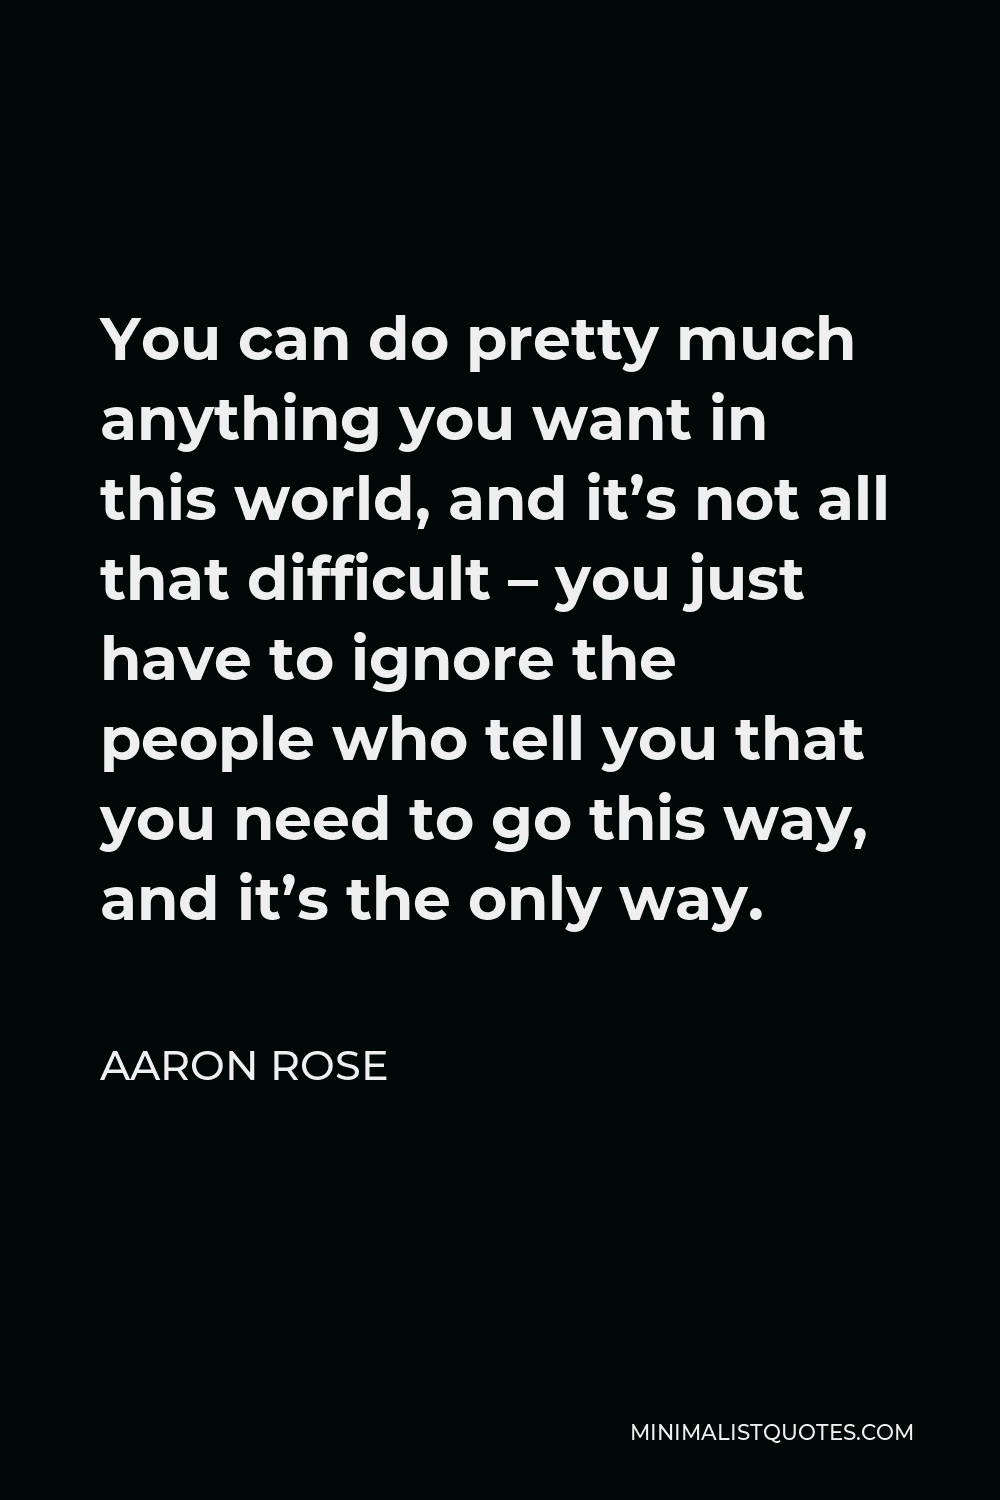 Aaron Rose Quote - You can do pretty much anything you want in this world, and it’s not all that difficult – you just have to ignore the people who tell you that you need to go this way, and it’s the only way.